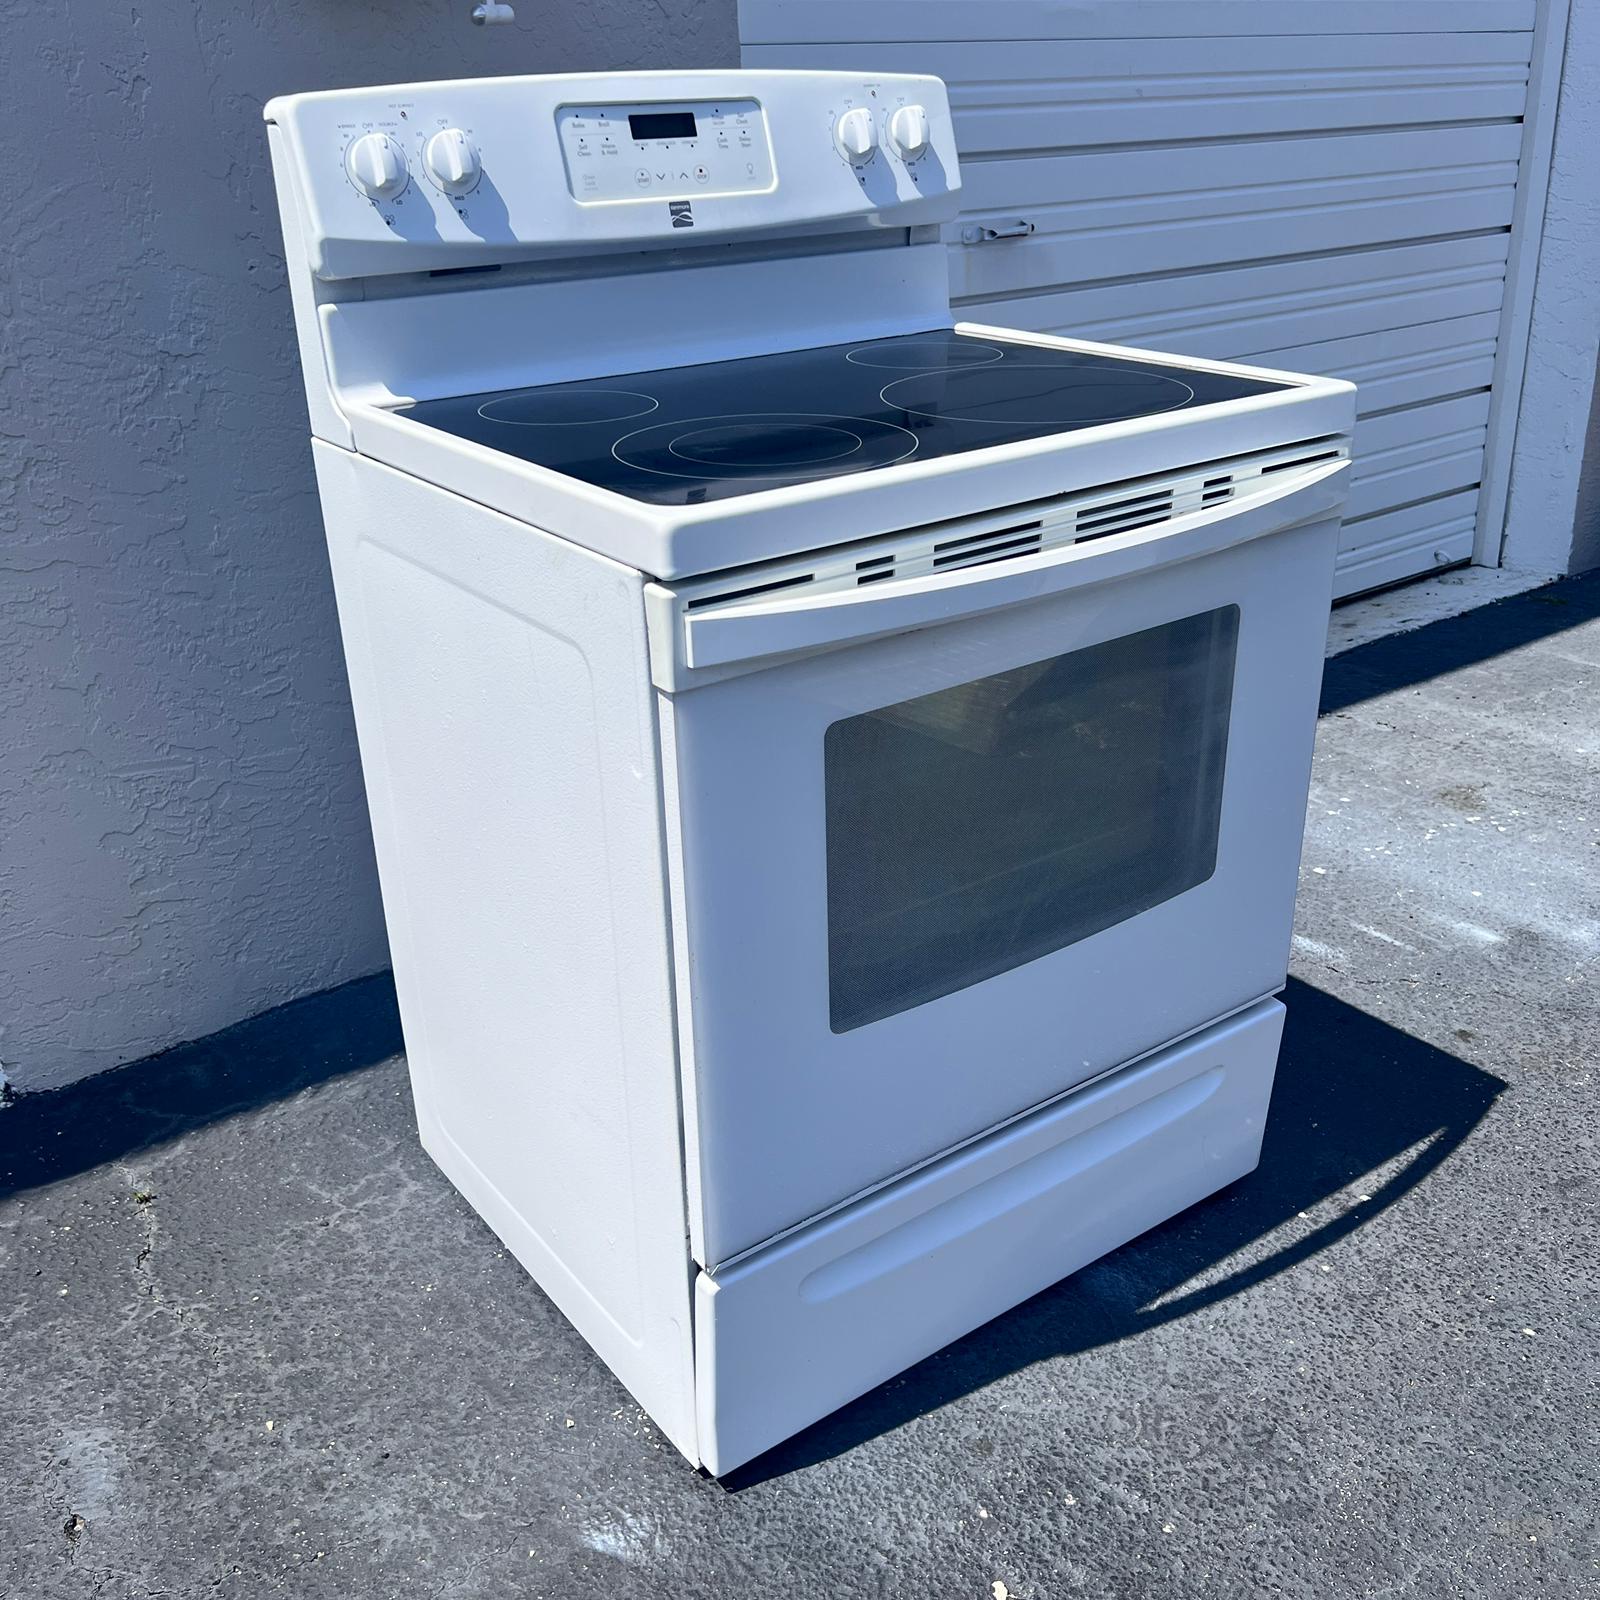 Kenmore Electric Stove